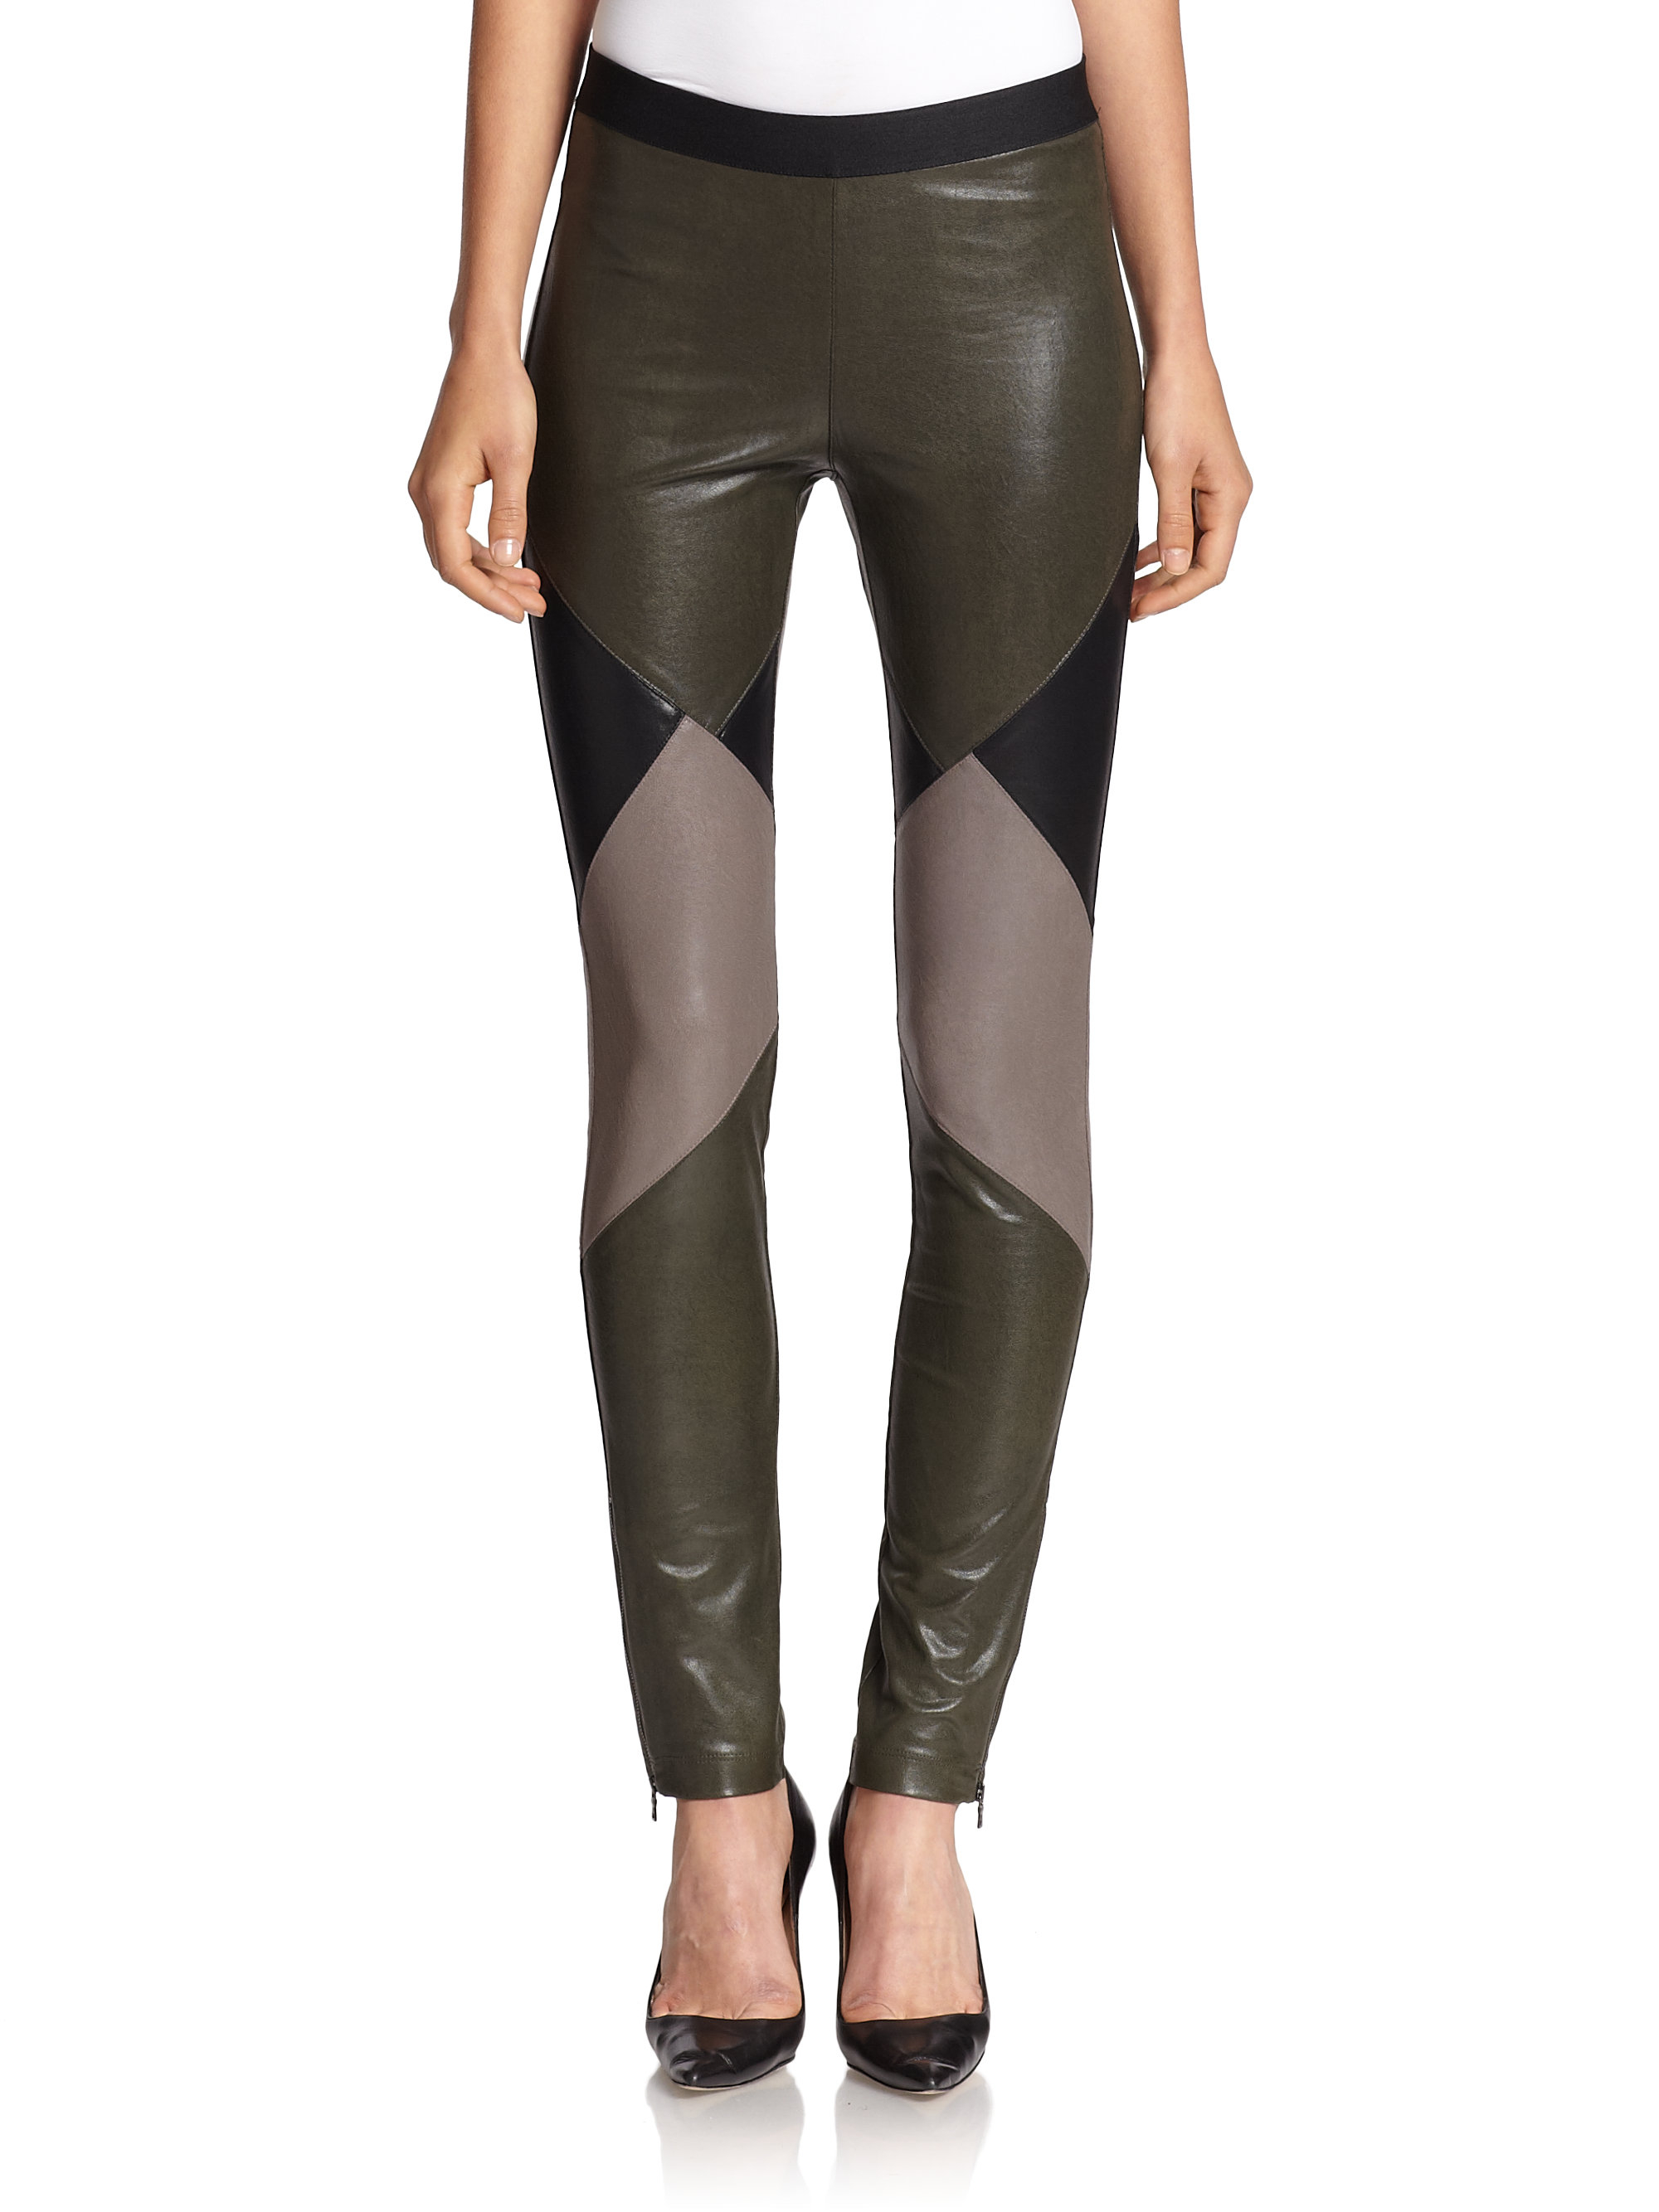 Bcbgmaxazria Jude Faux Leather Leggings in Green (DEEP OLIVE)